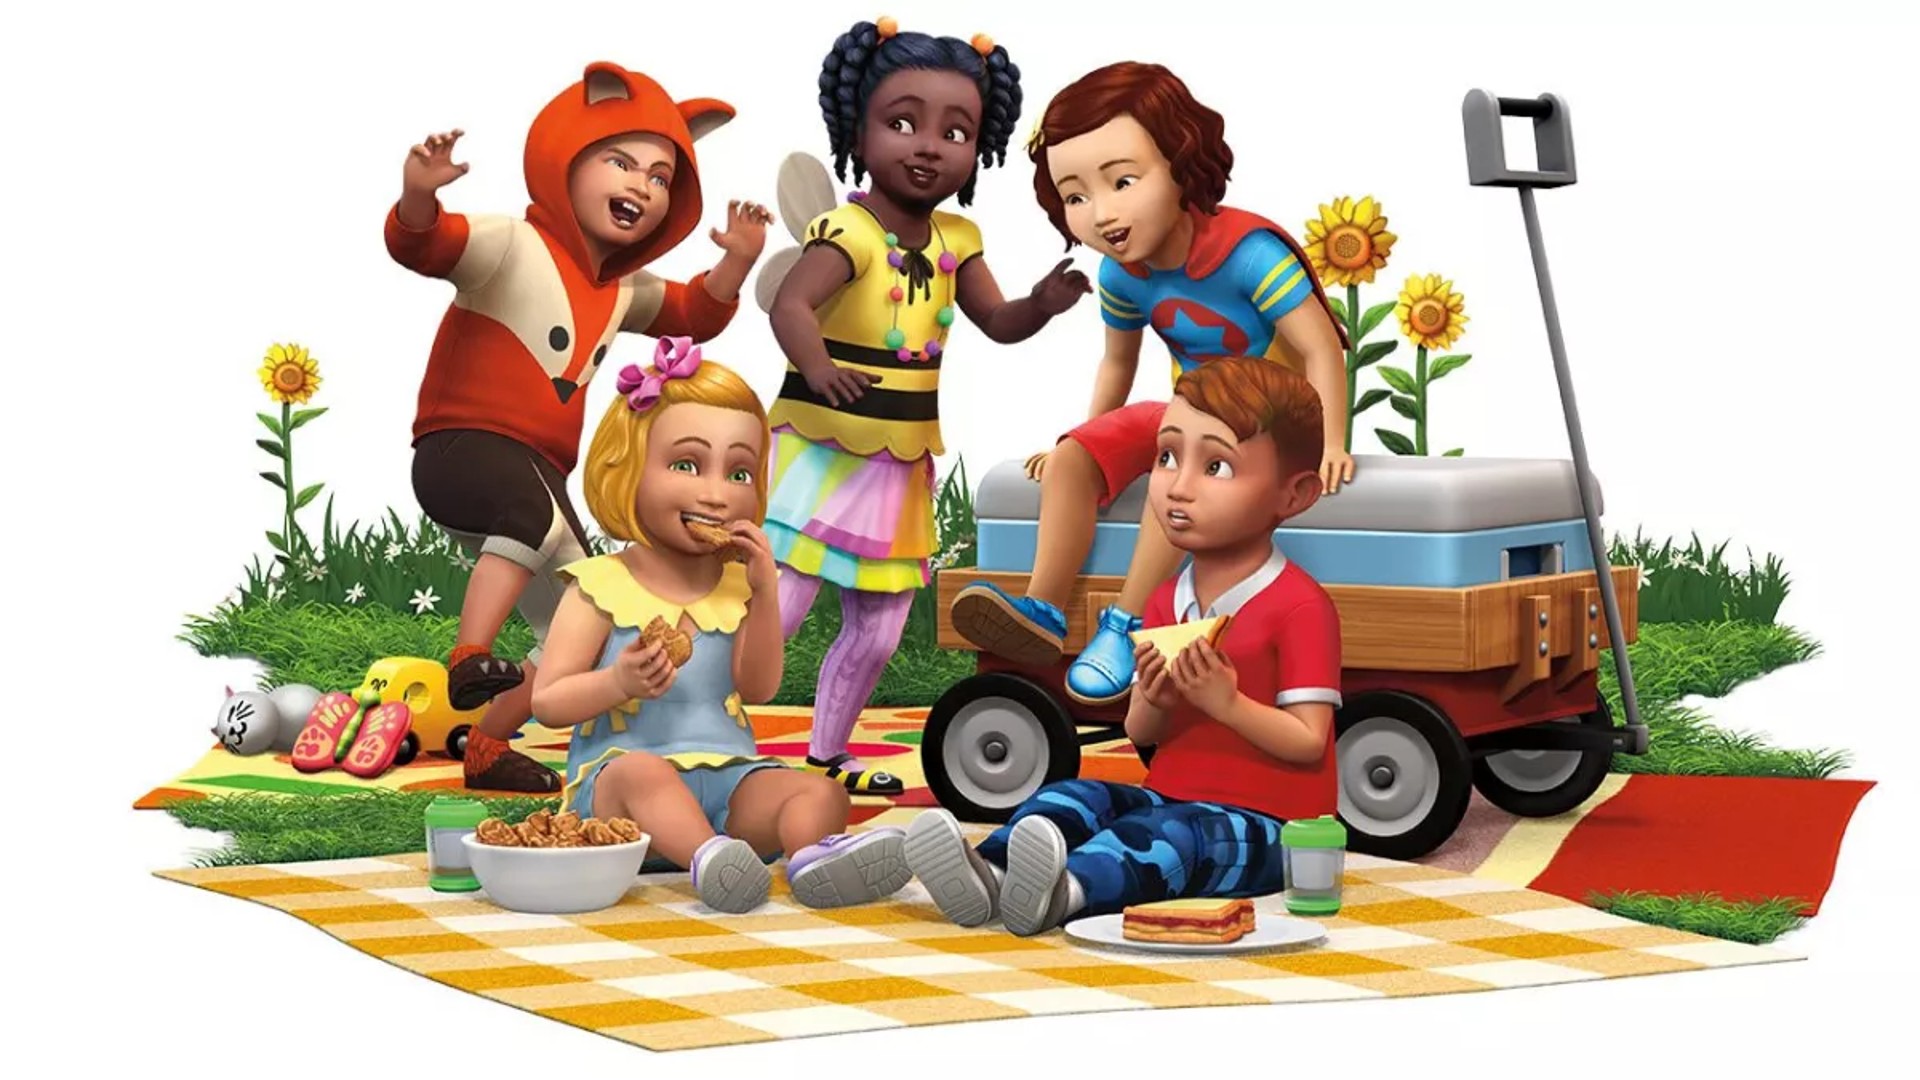 sims 4 babies and toddlers